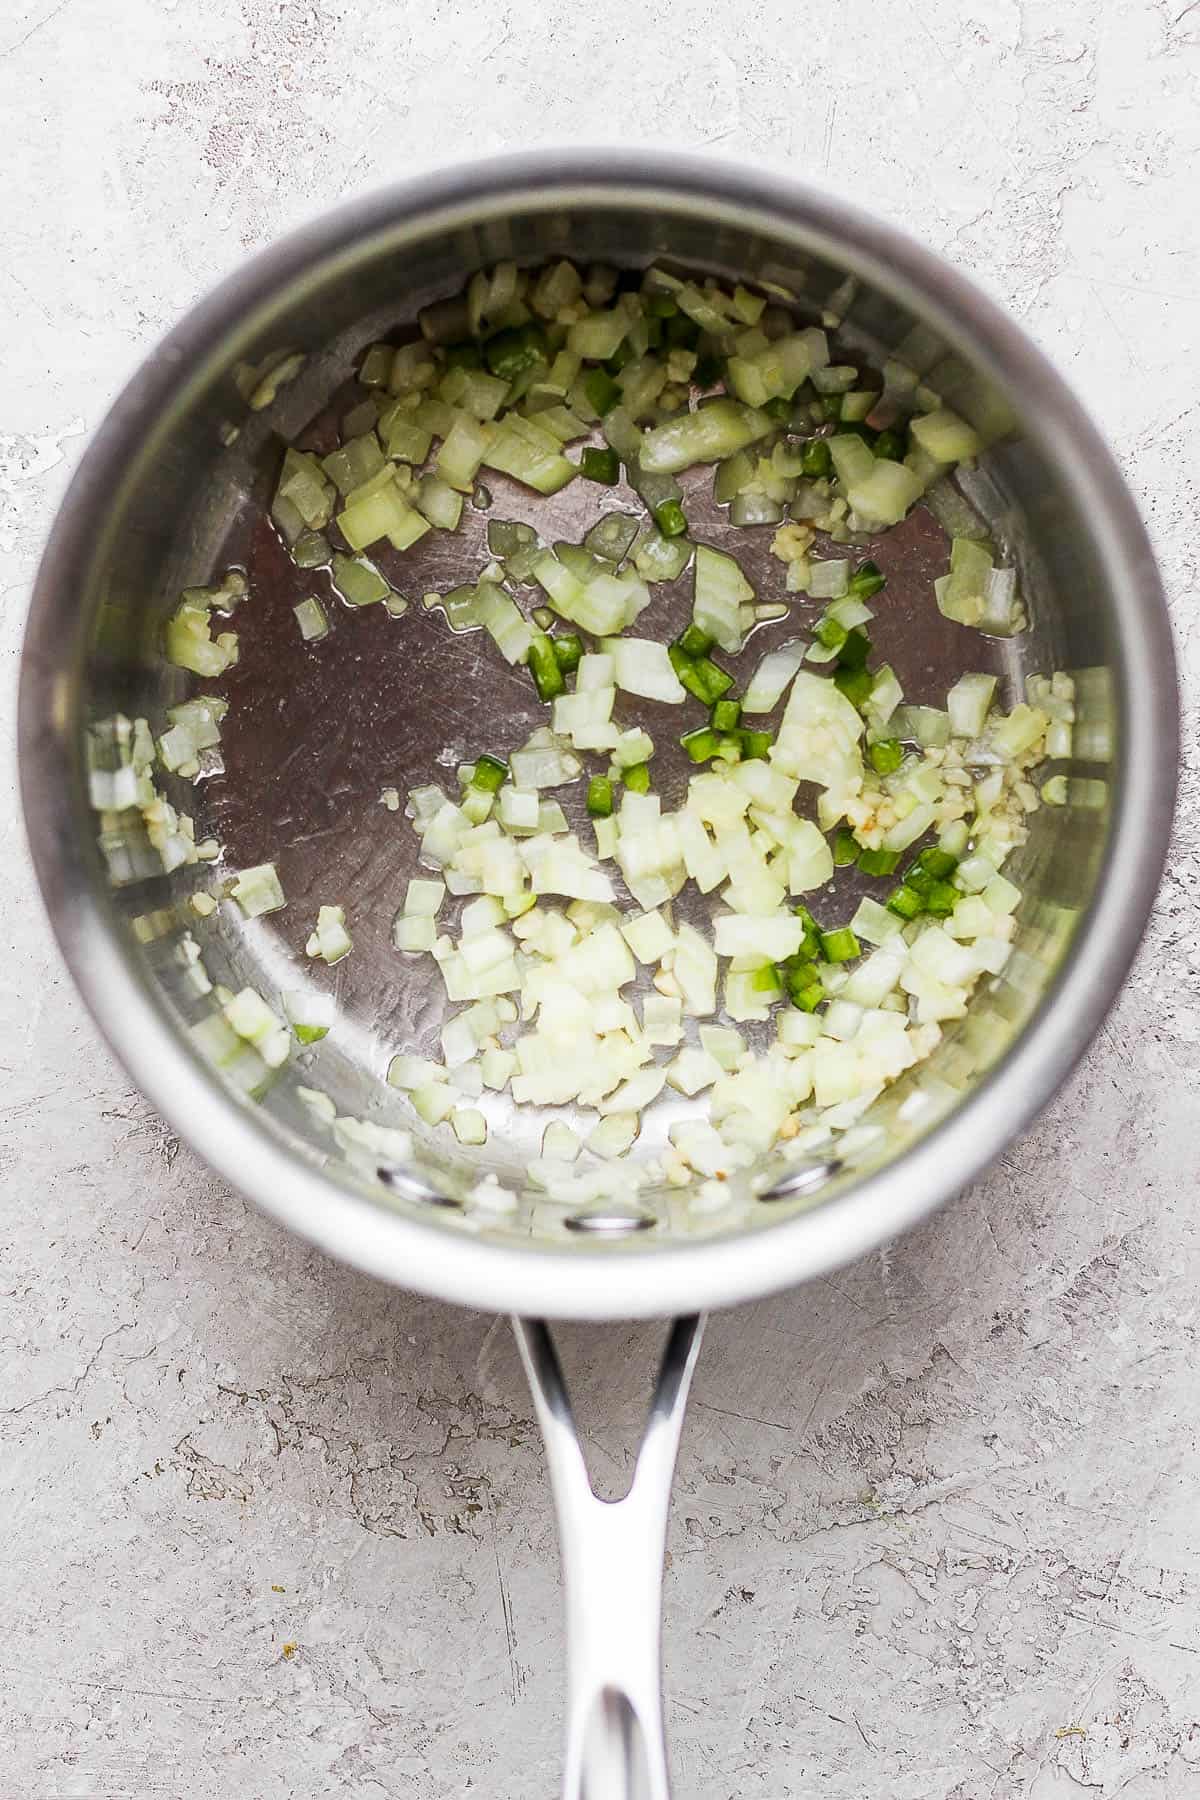 garlic, onion, and jalapeno sauteing in a pan.